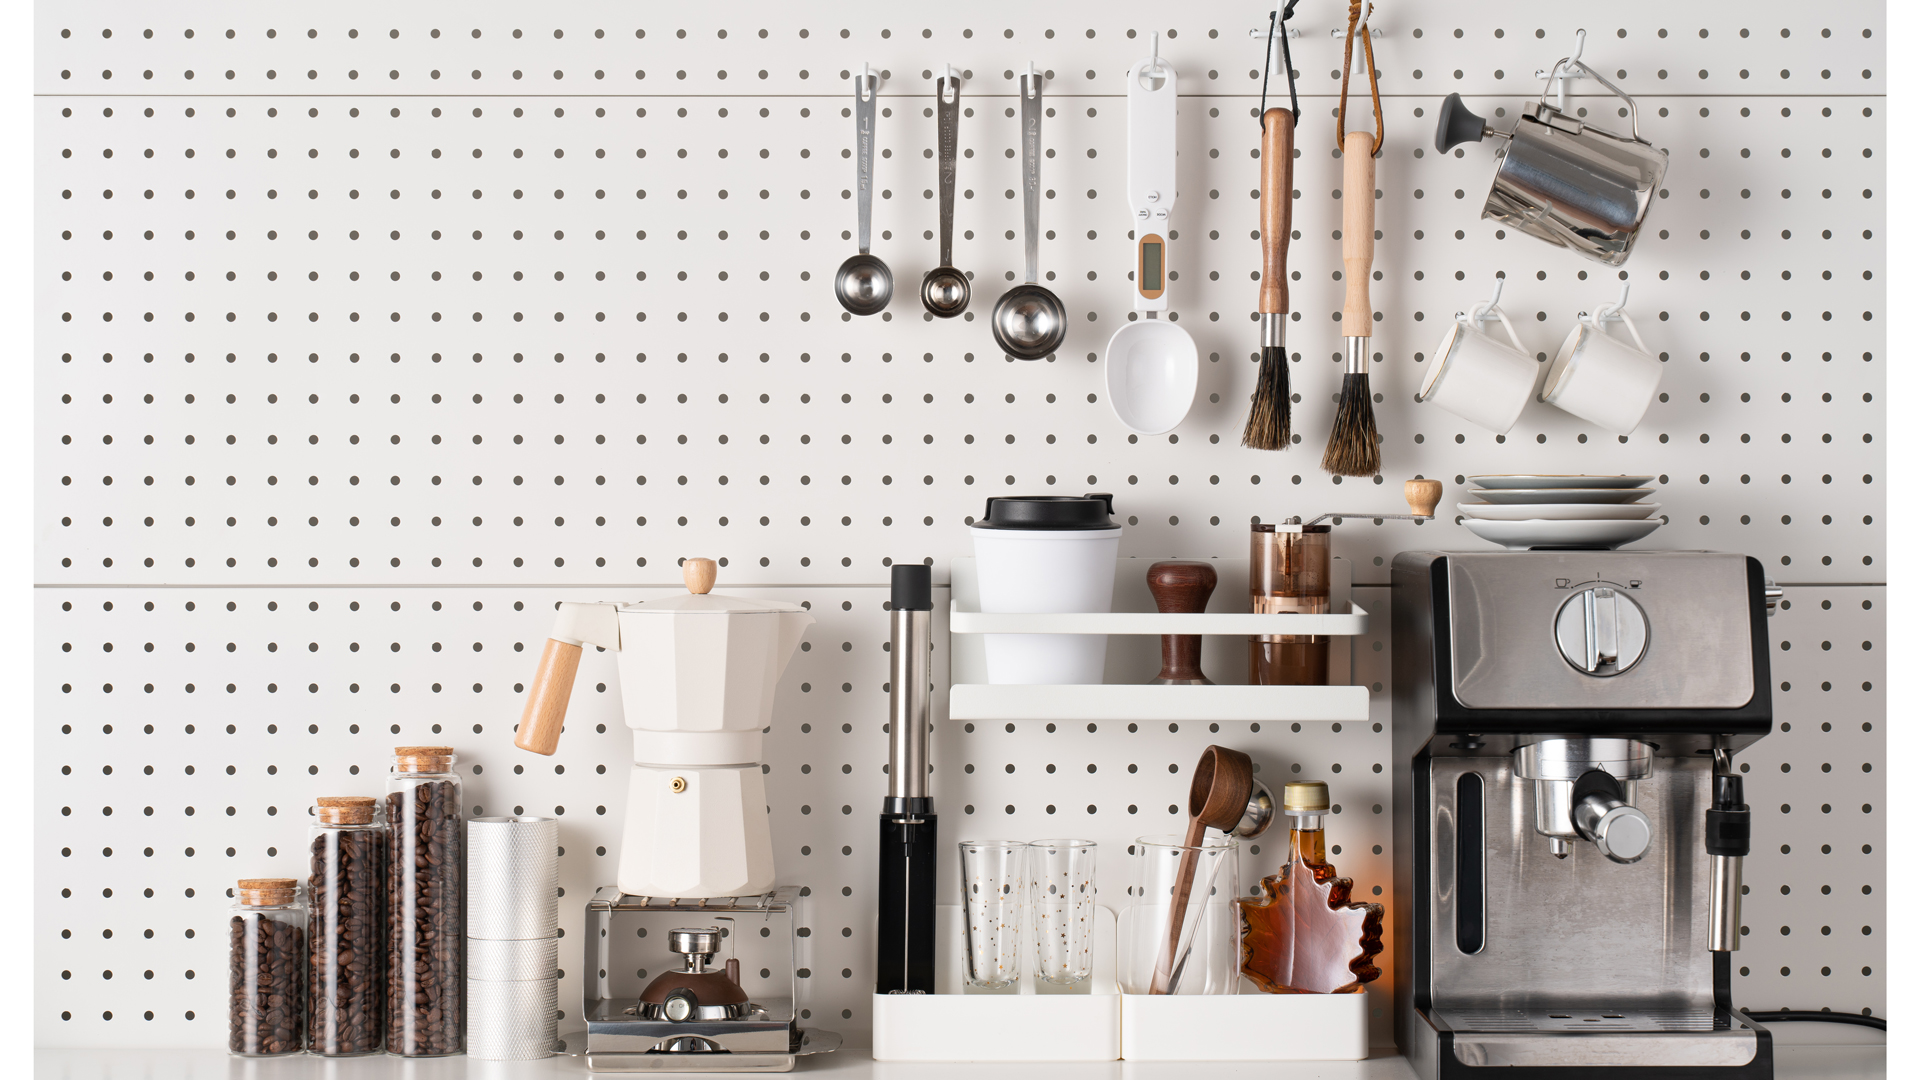 white kitchen pegboard used a splashback and kitchen storage idea combined with utensils hanging beside a coffee machine